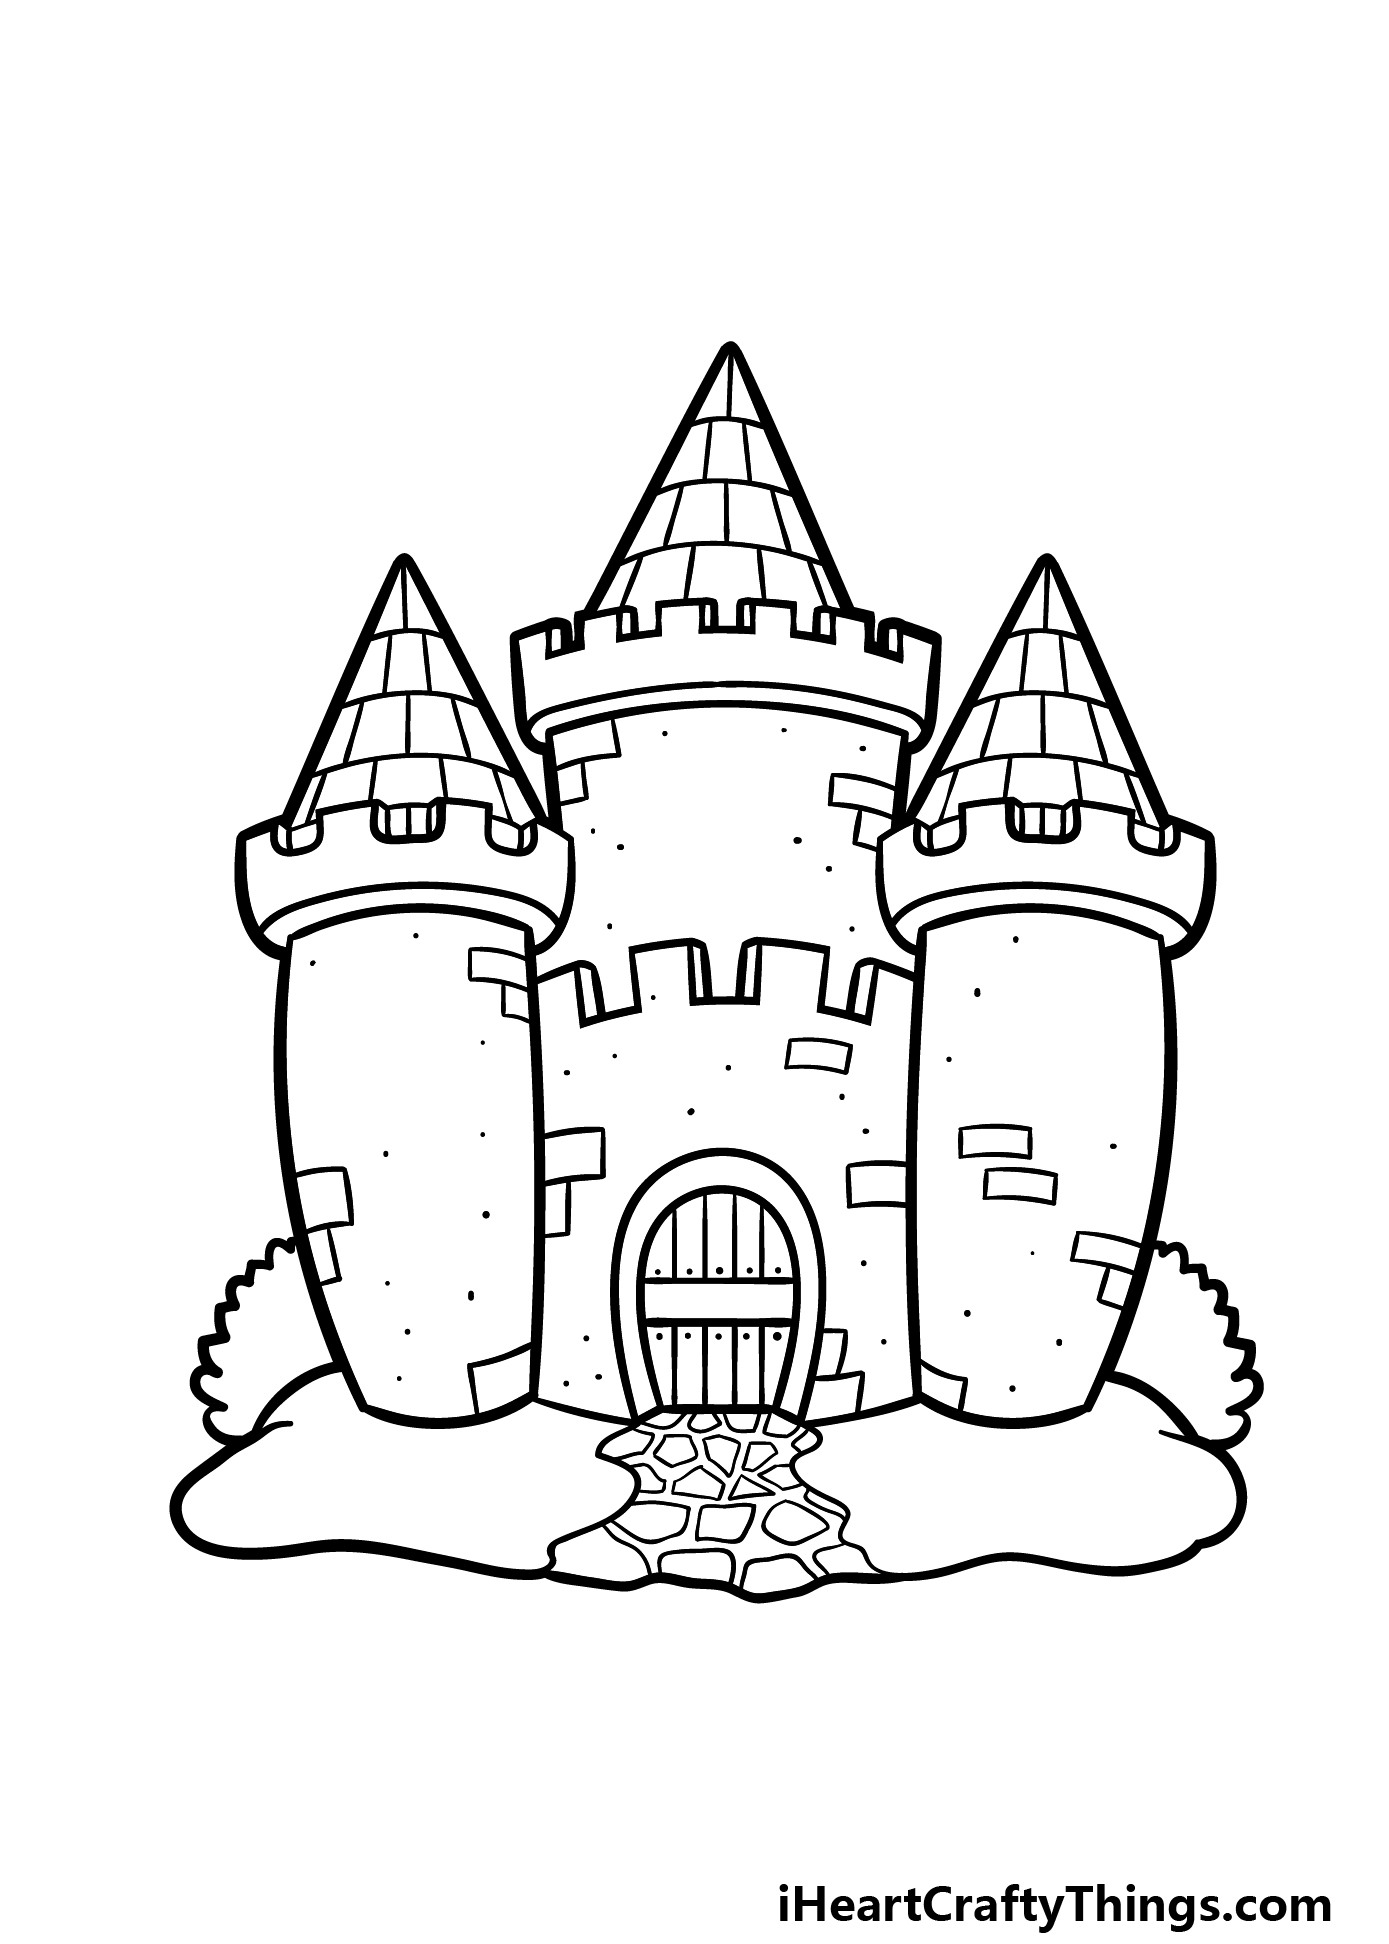 Cartoon Castle Drawing - How To Draw A Cartoon Castle Step By Step